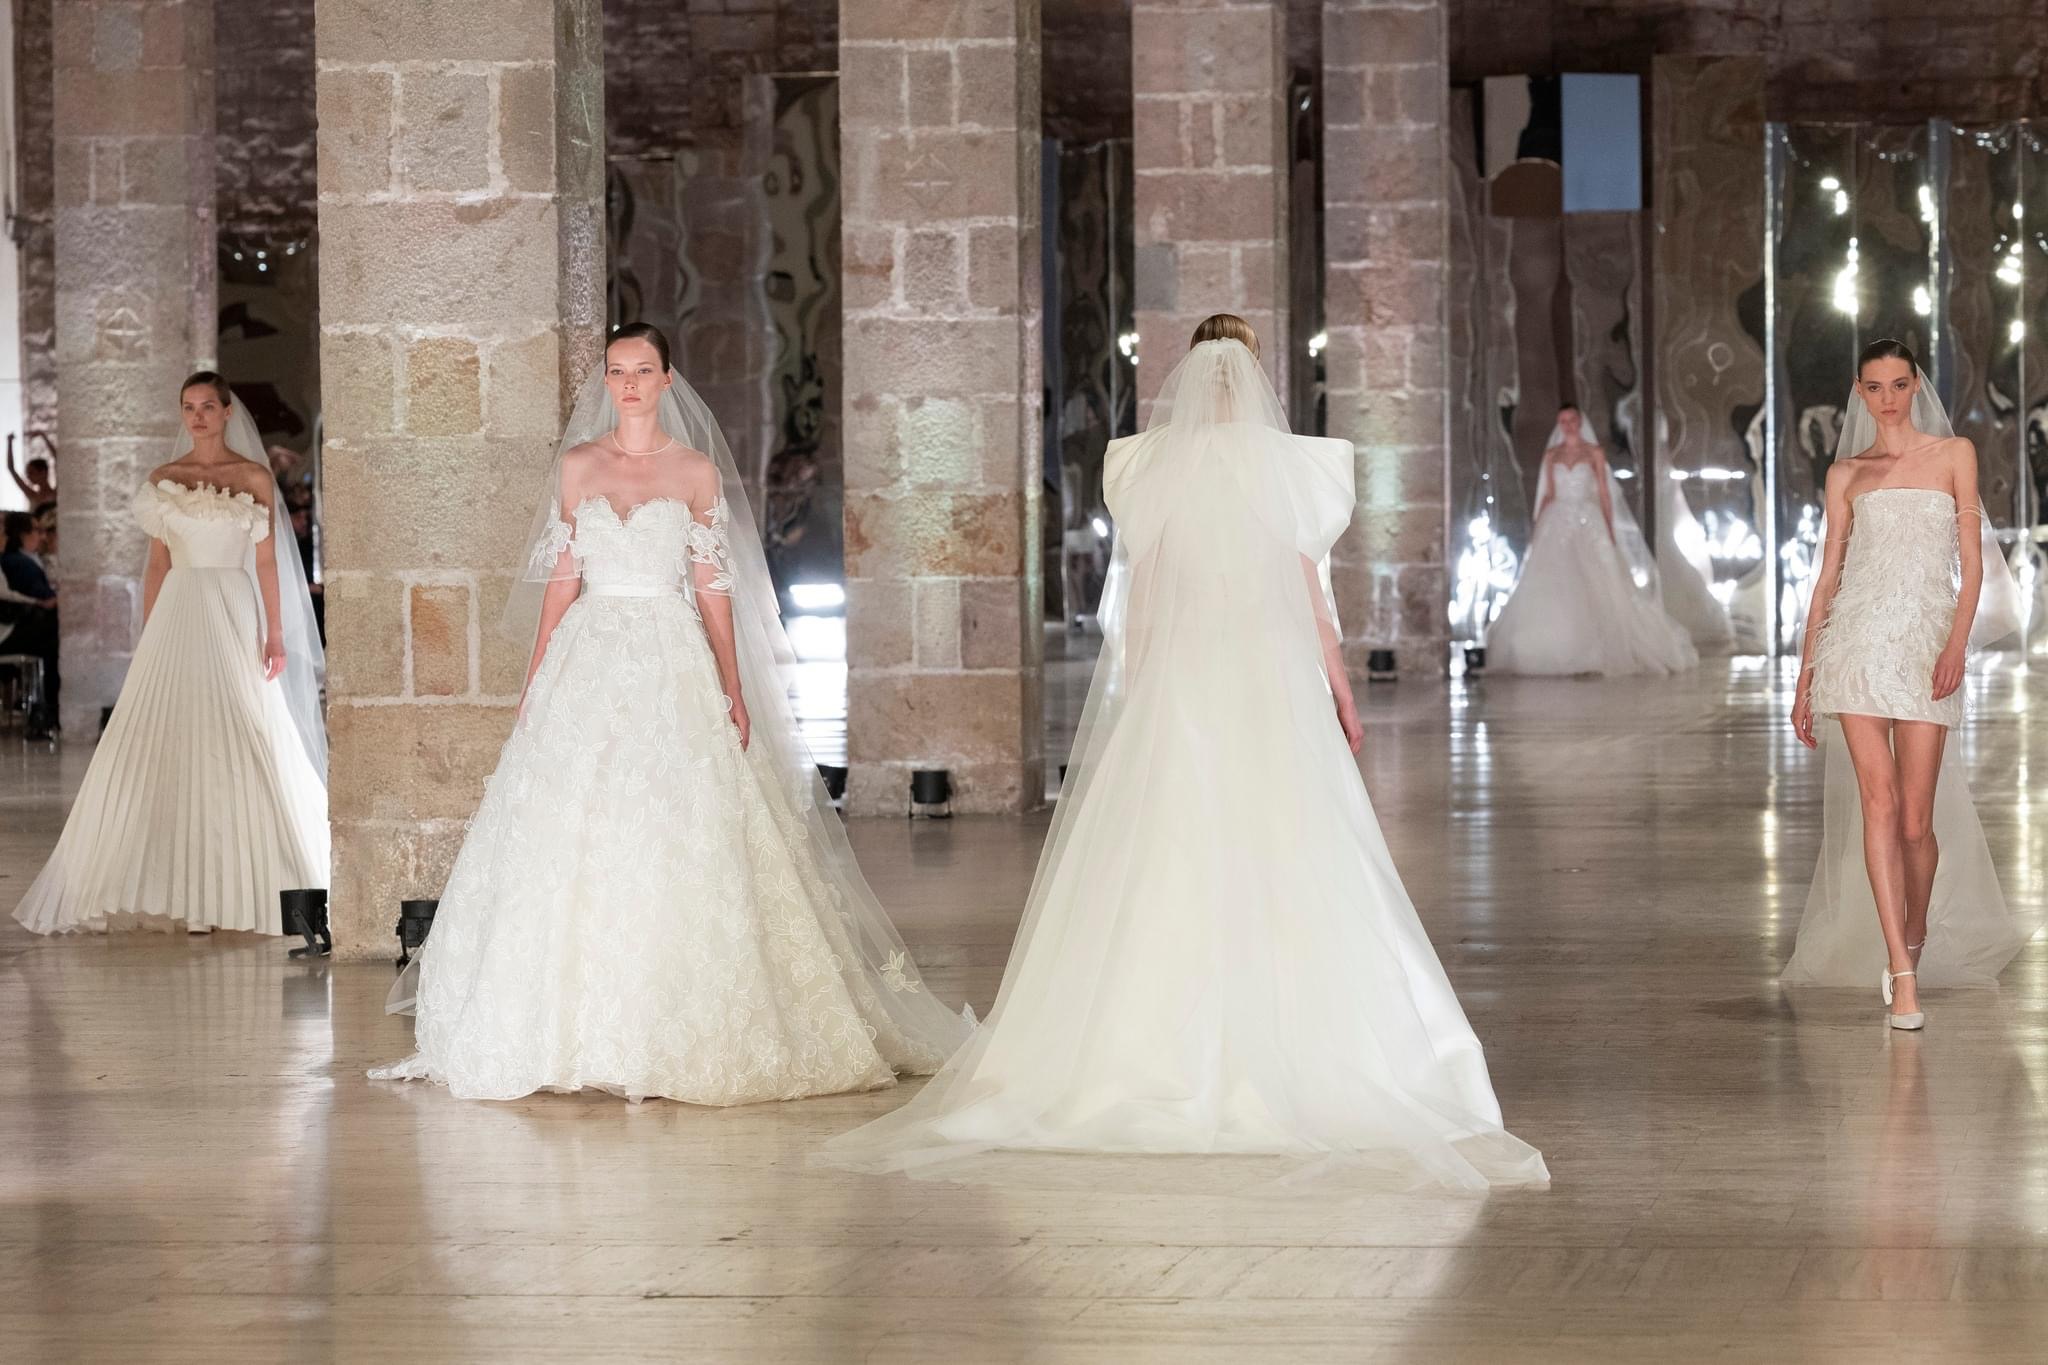 Overwhelmed by the stunning wedding dresses at Barcelona Bridal Fashion Week 2023